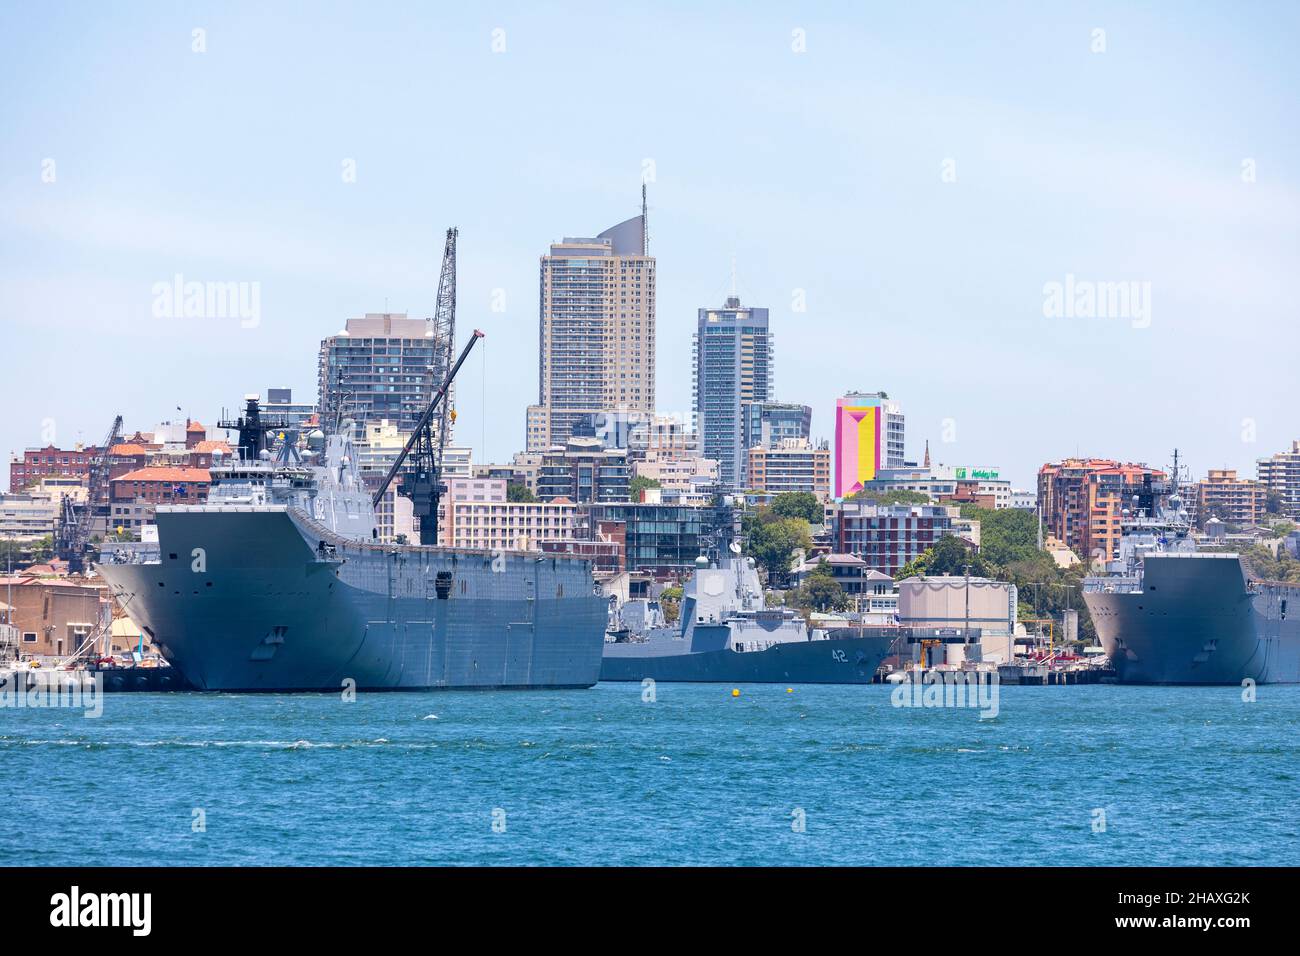 HMAS Canberra LO2 of the Royal Australian Navy at Garden Island naval base in Sydney, an amphibious assault ship launched in 2011 Stock Photo